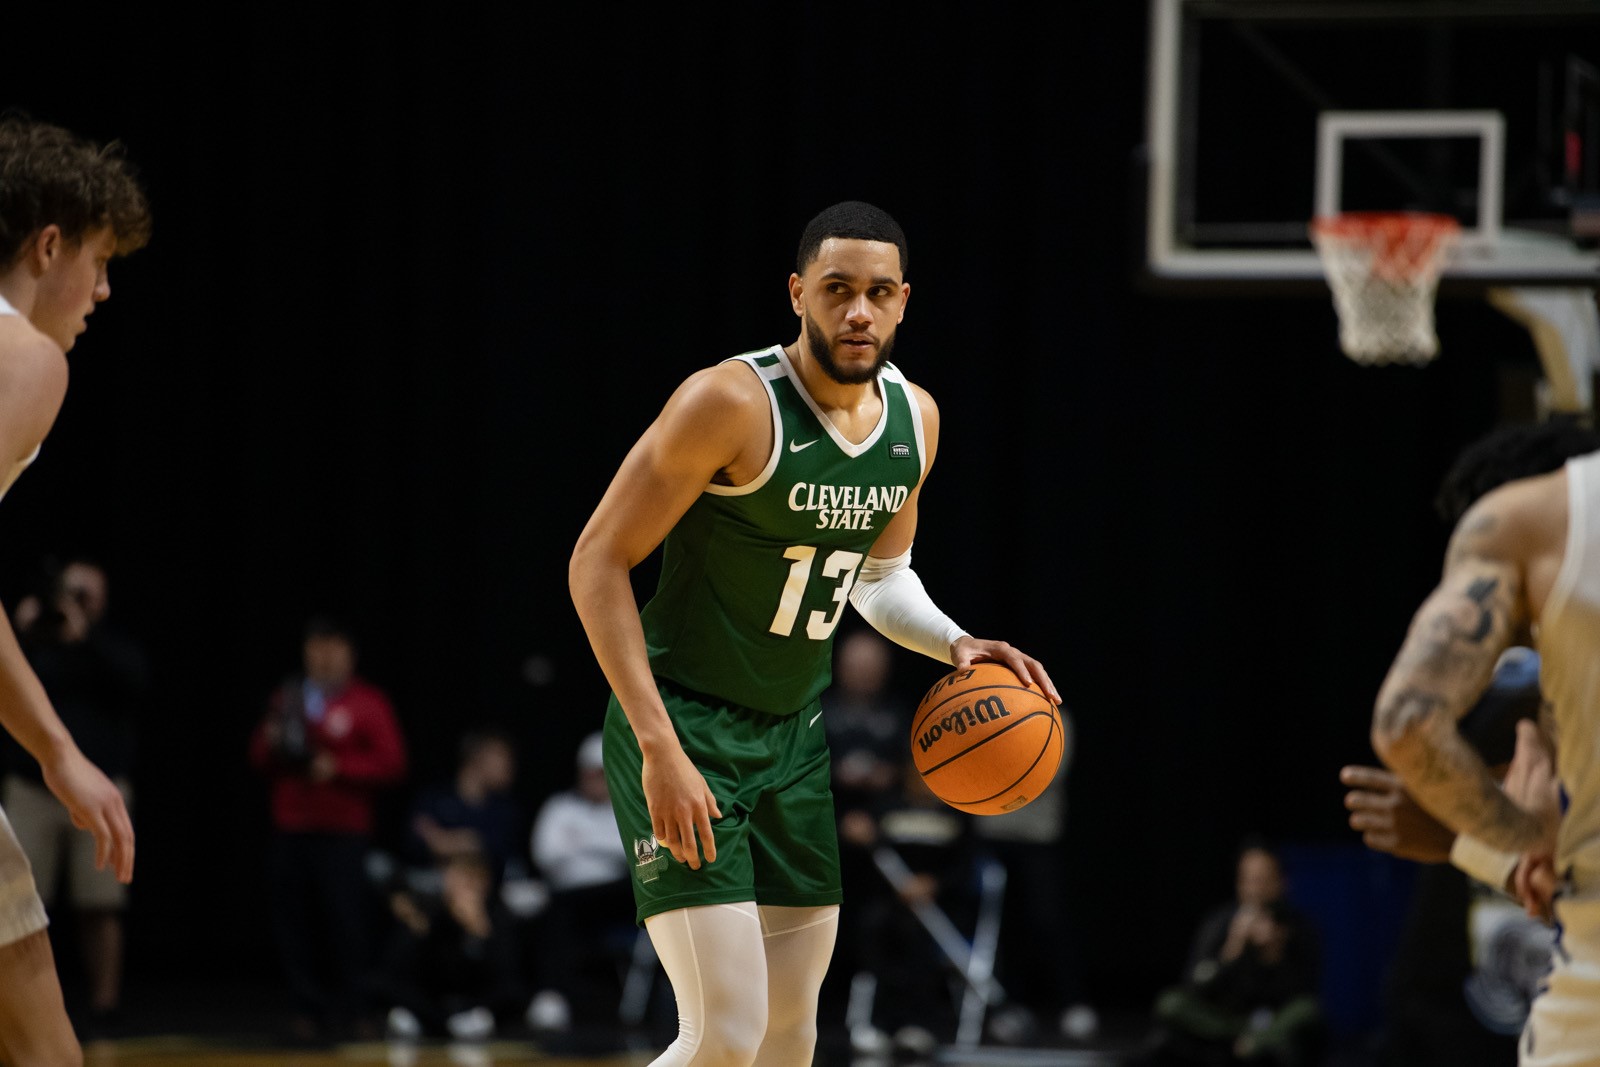 Cleveland State Men’s Basketball Earns Comeback Road Win Over Purdue Fort Wayne